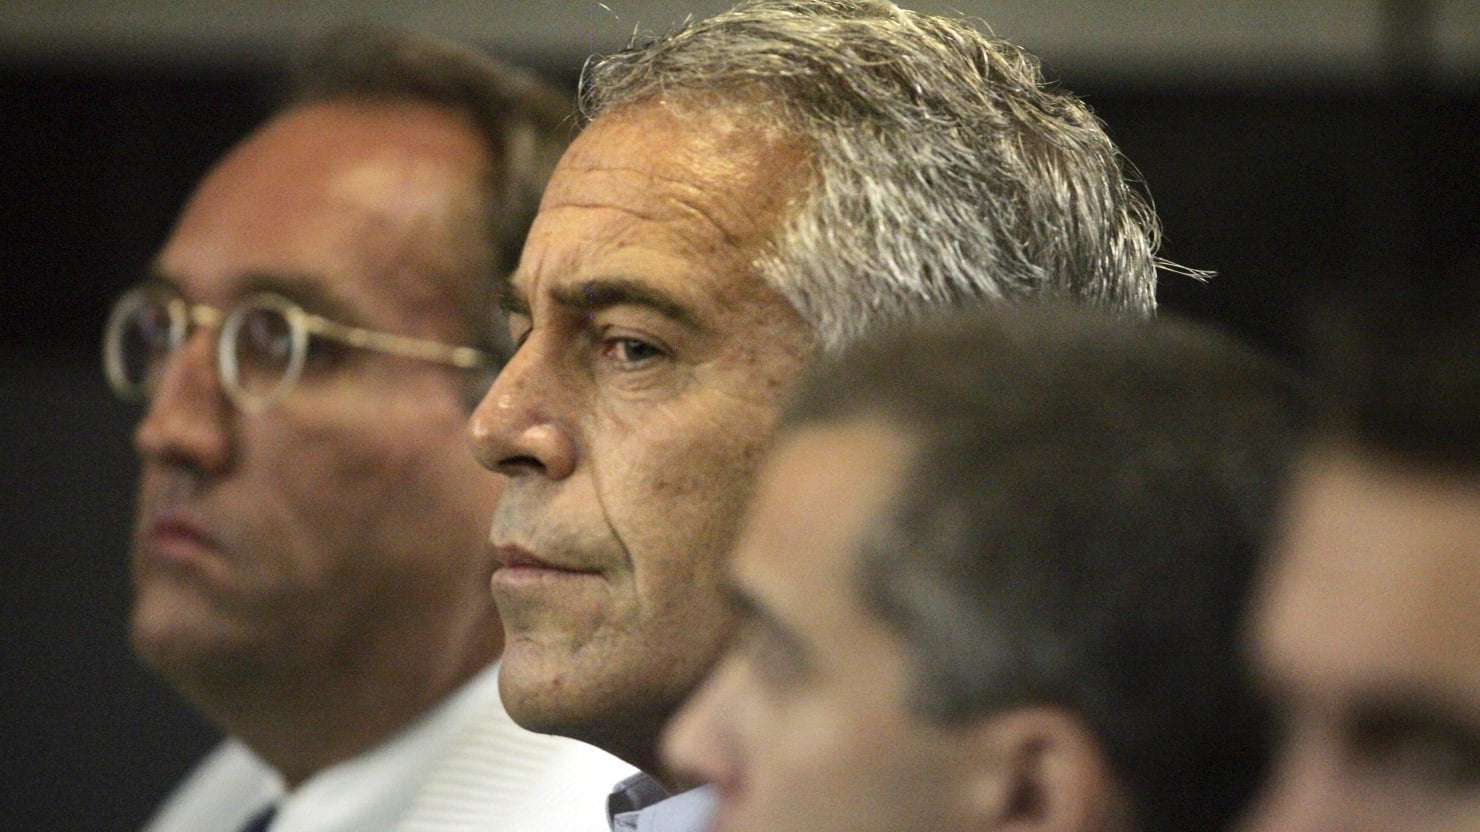 image for New Accuser Jennifer Araoz: Jeffrey Epstein Raped Me in His NYC Townhouse When I Was 15